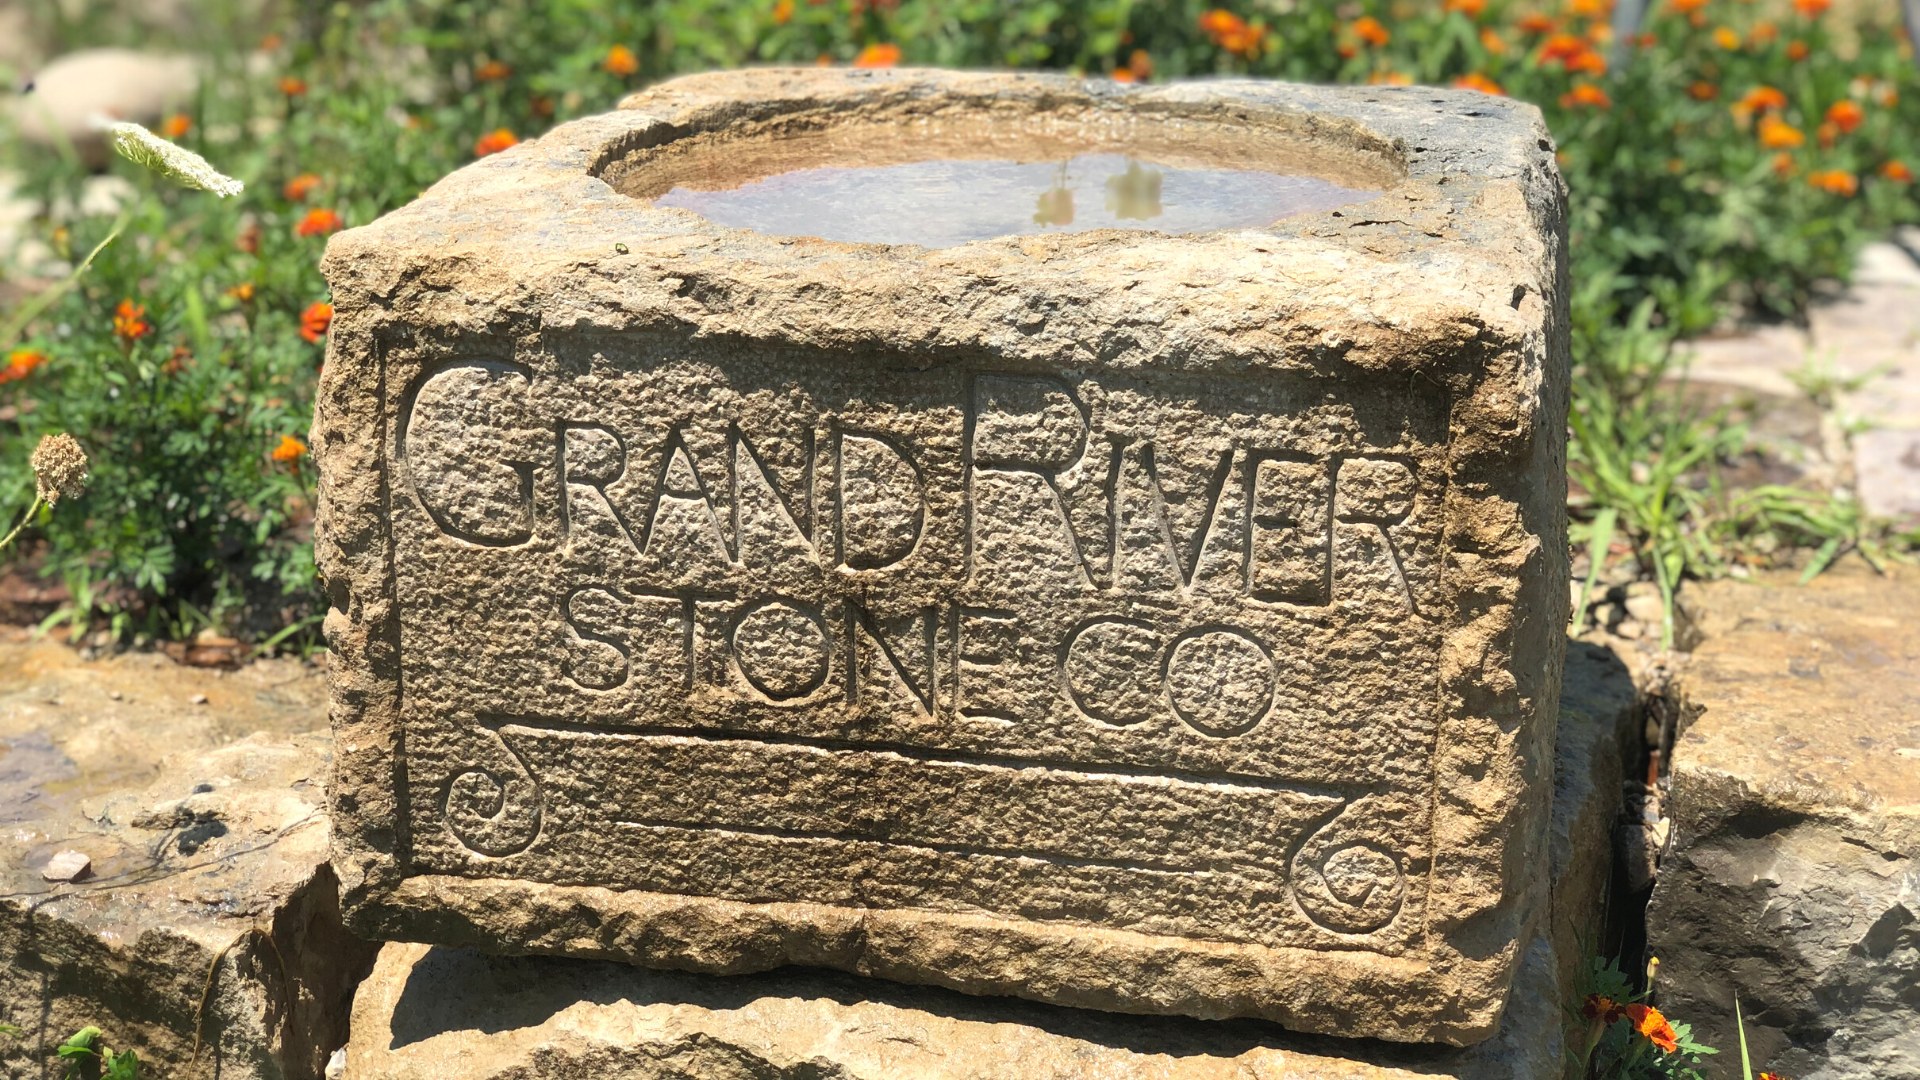 Grand River Stone small water fixture